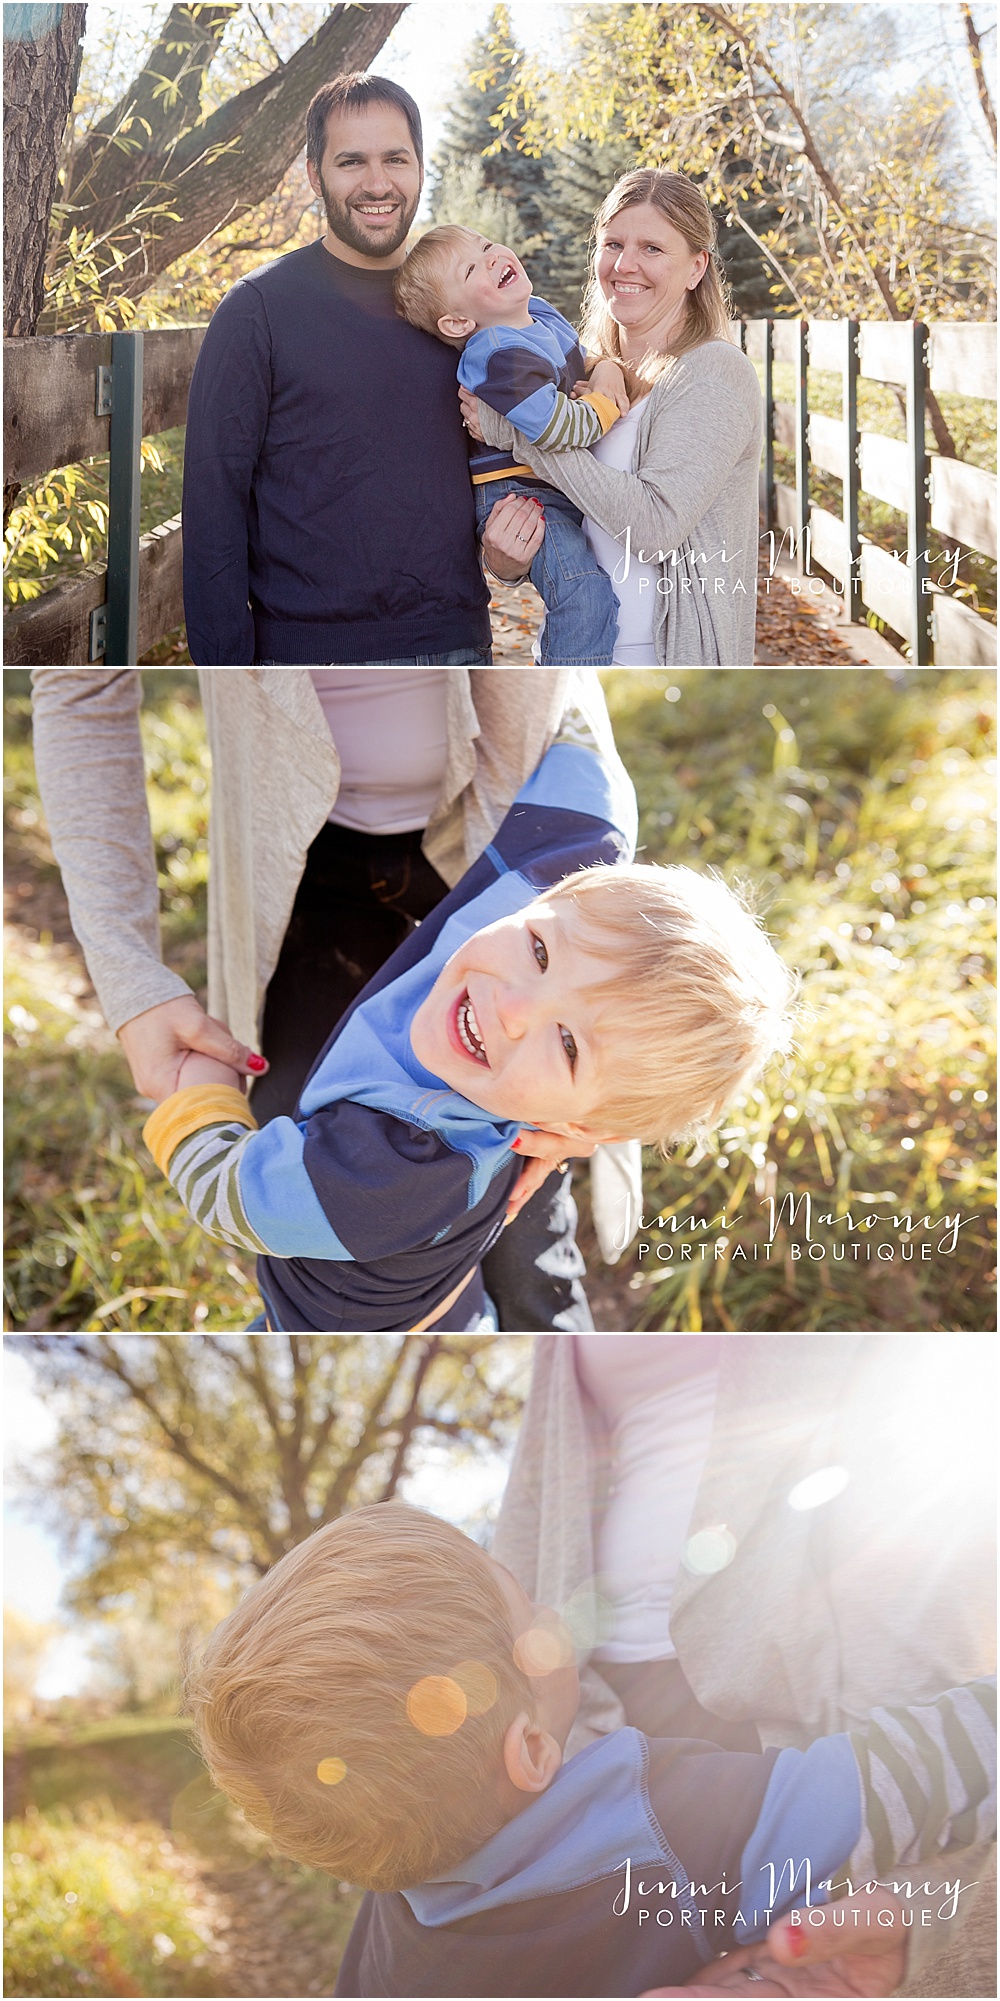 Boulder family photographer Jenni Maroney offers custom holiday cards to her Boulder and Denver family portrait clients.